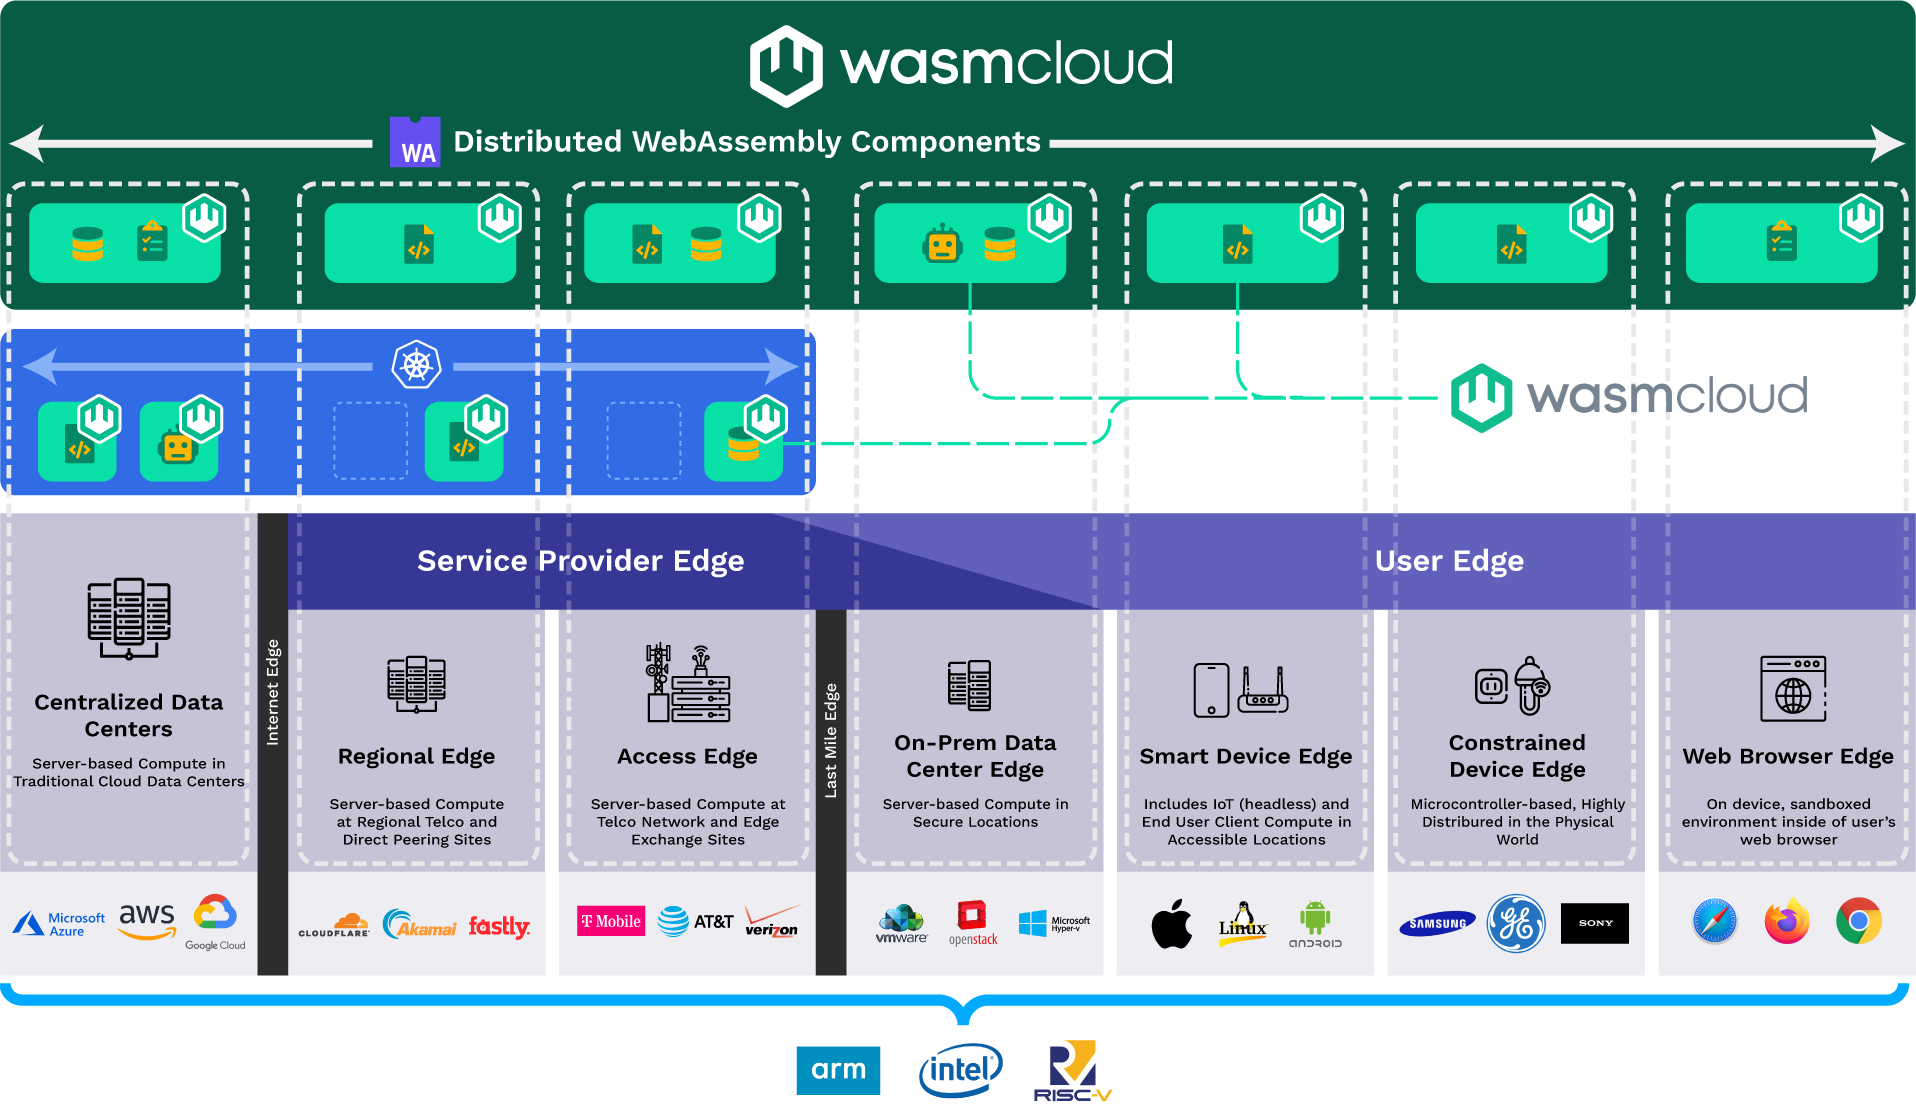 wasmCloud applications can be deployed on Kubernetes clusters while still retaining all the benefits of more distributed architectures, all while remaining connected to the same lattice.